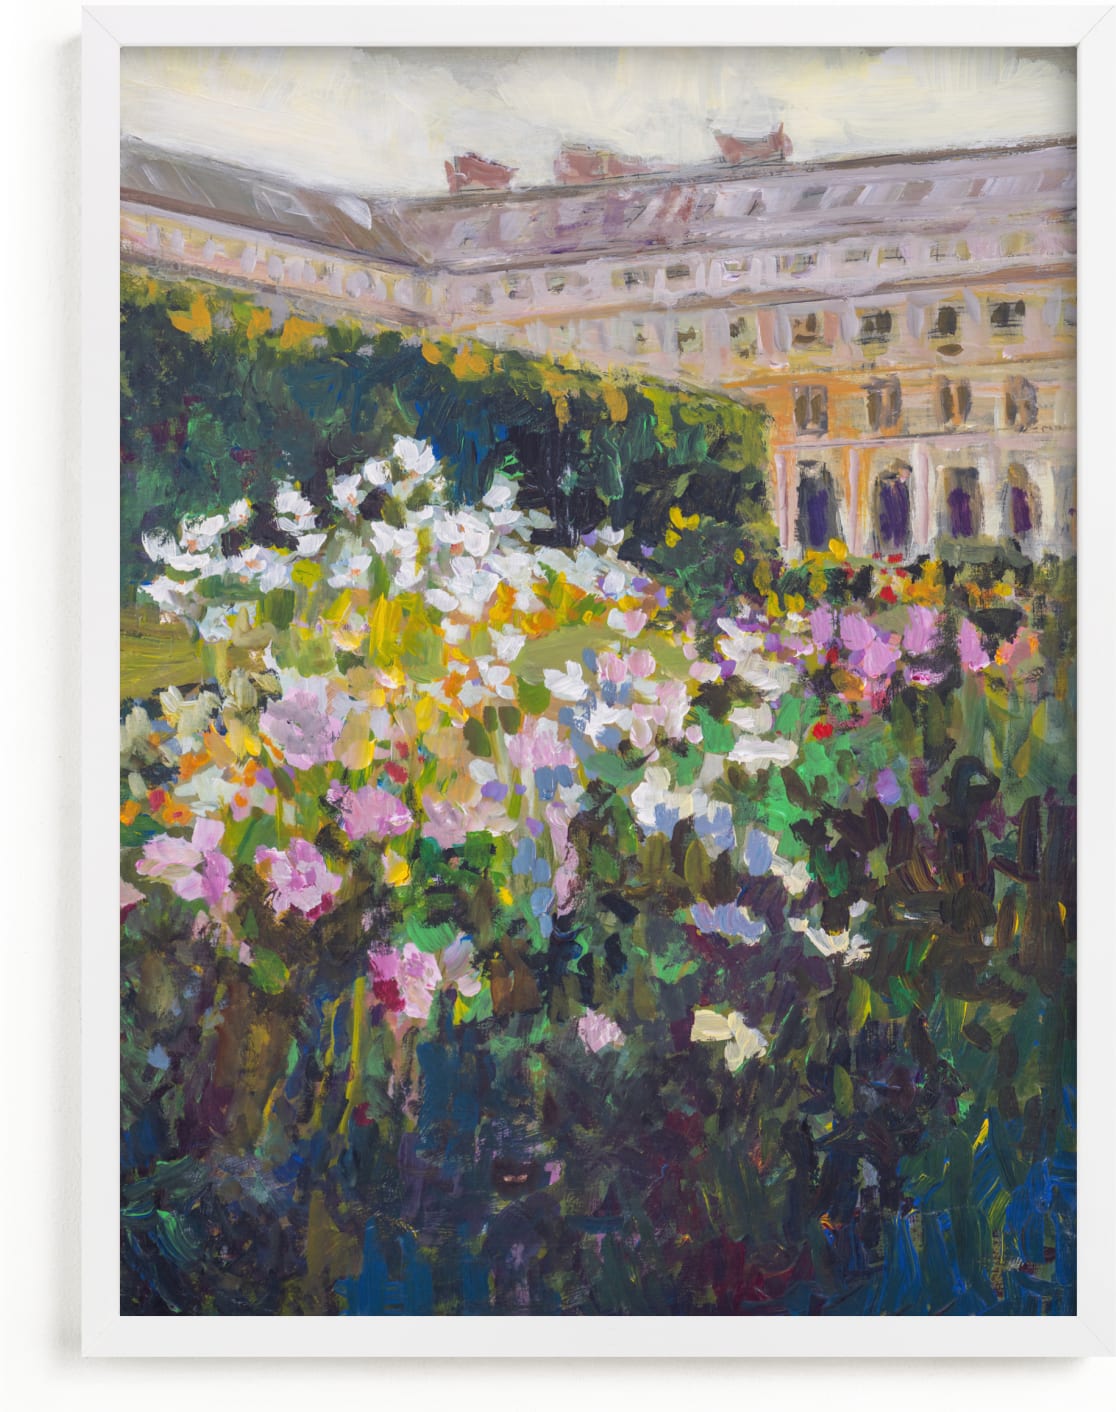 This is a colorful art by Jacquelyn Sloane Siklos called in the garden of the Palais Royale.